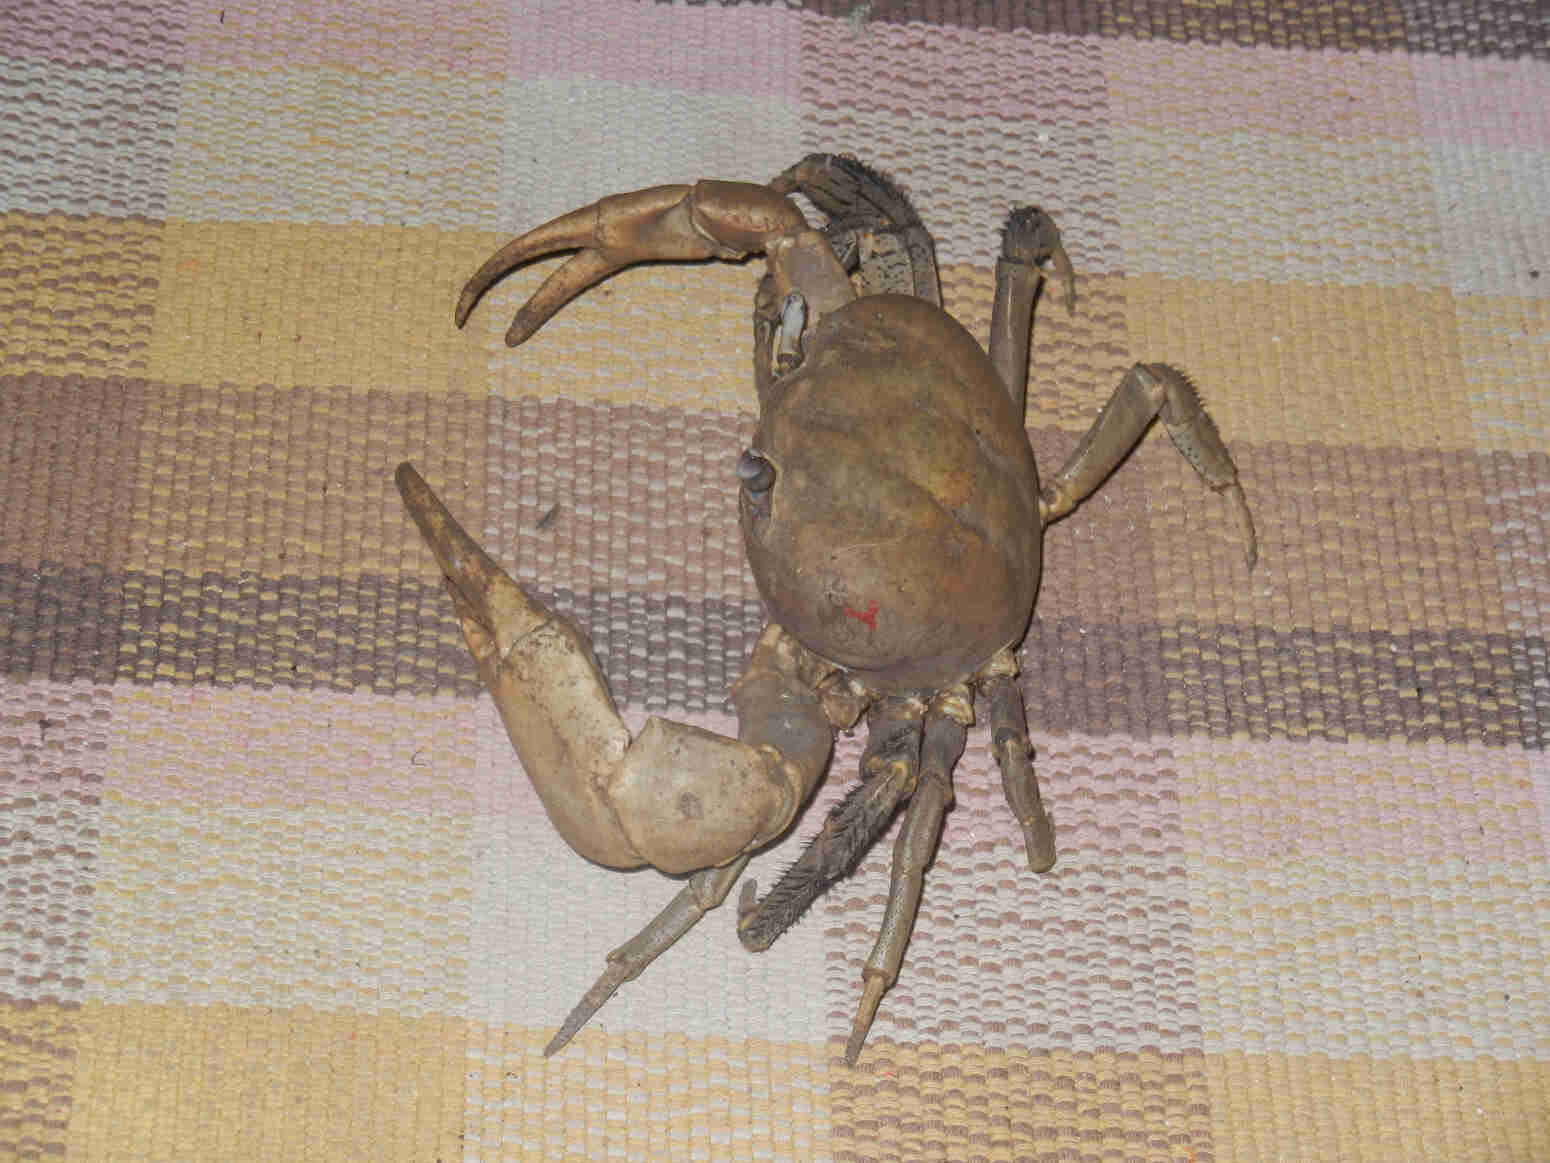 I found this giant crab in my hotel room in Bora Bora